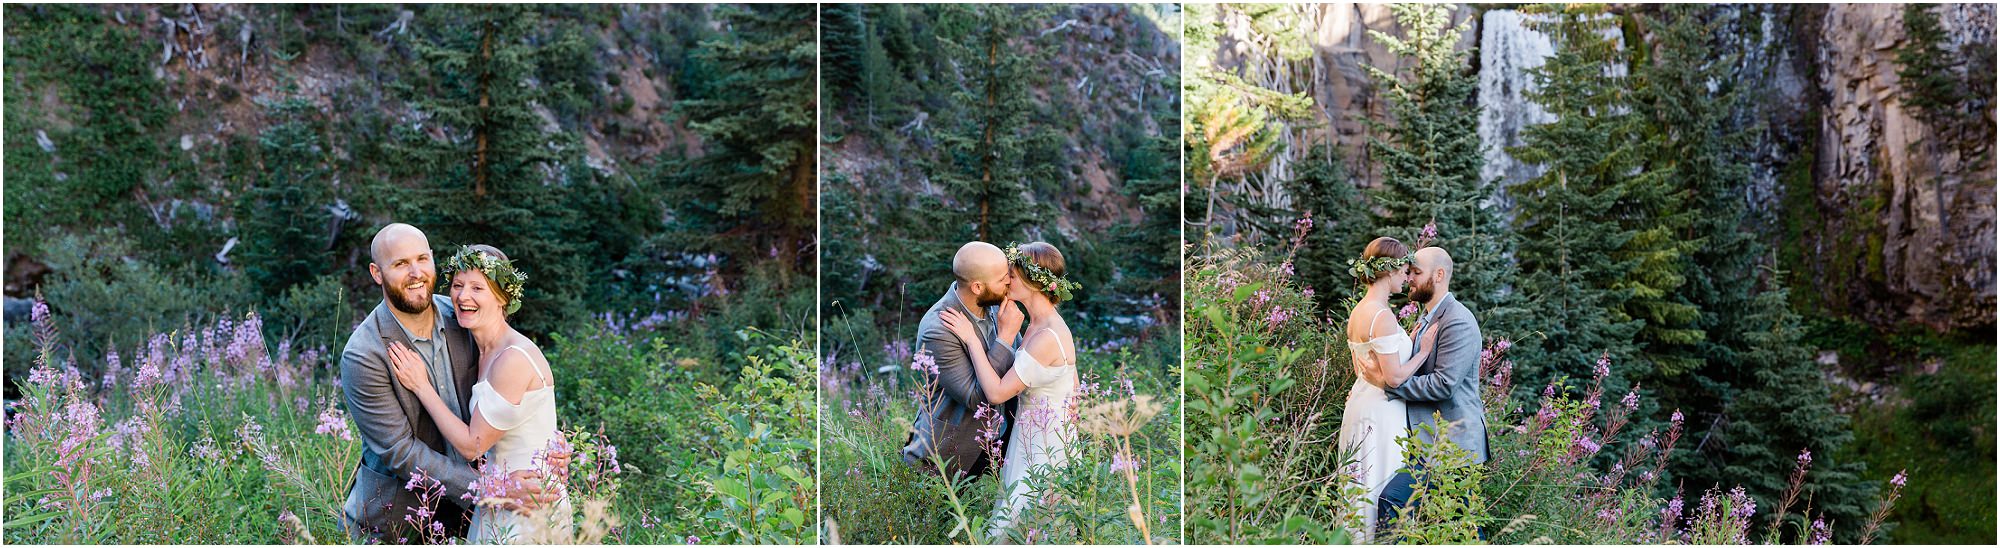 A bride and groom stand in the fireweed wildflowers and snuggle in close during their Tumalo Falls elopement photography session. | Erica Swantek Photography